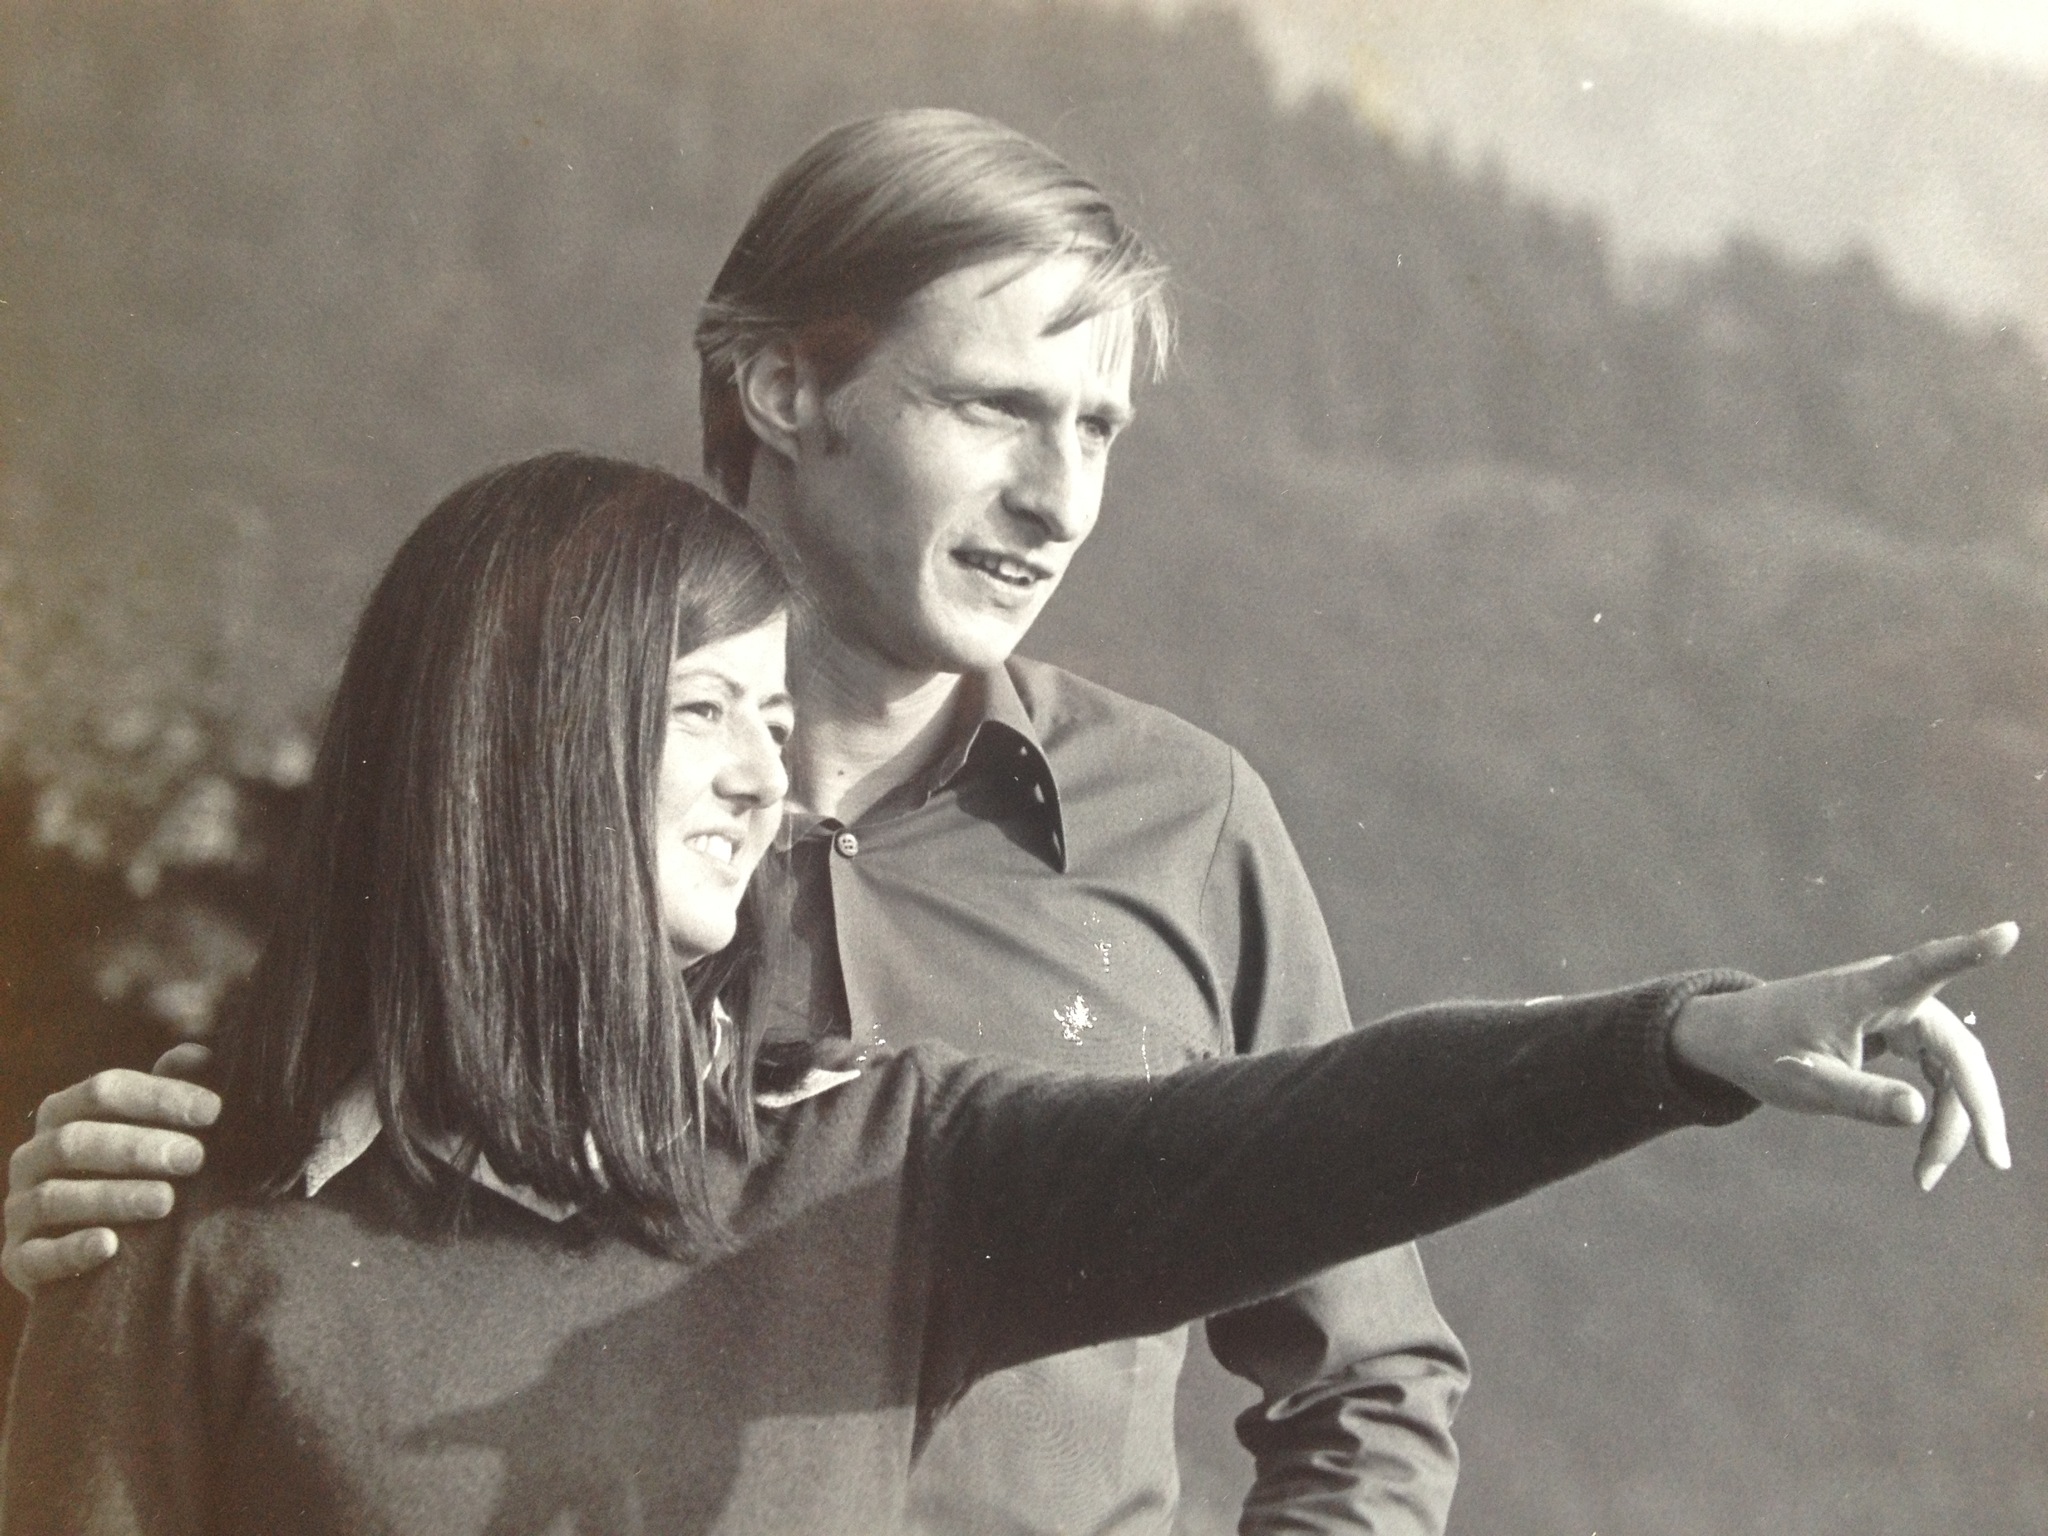 Vendela and Philip Tyndale-Biscoe engaged in Caux 1979